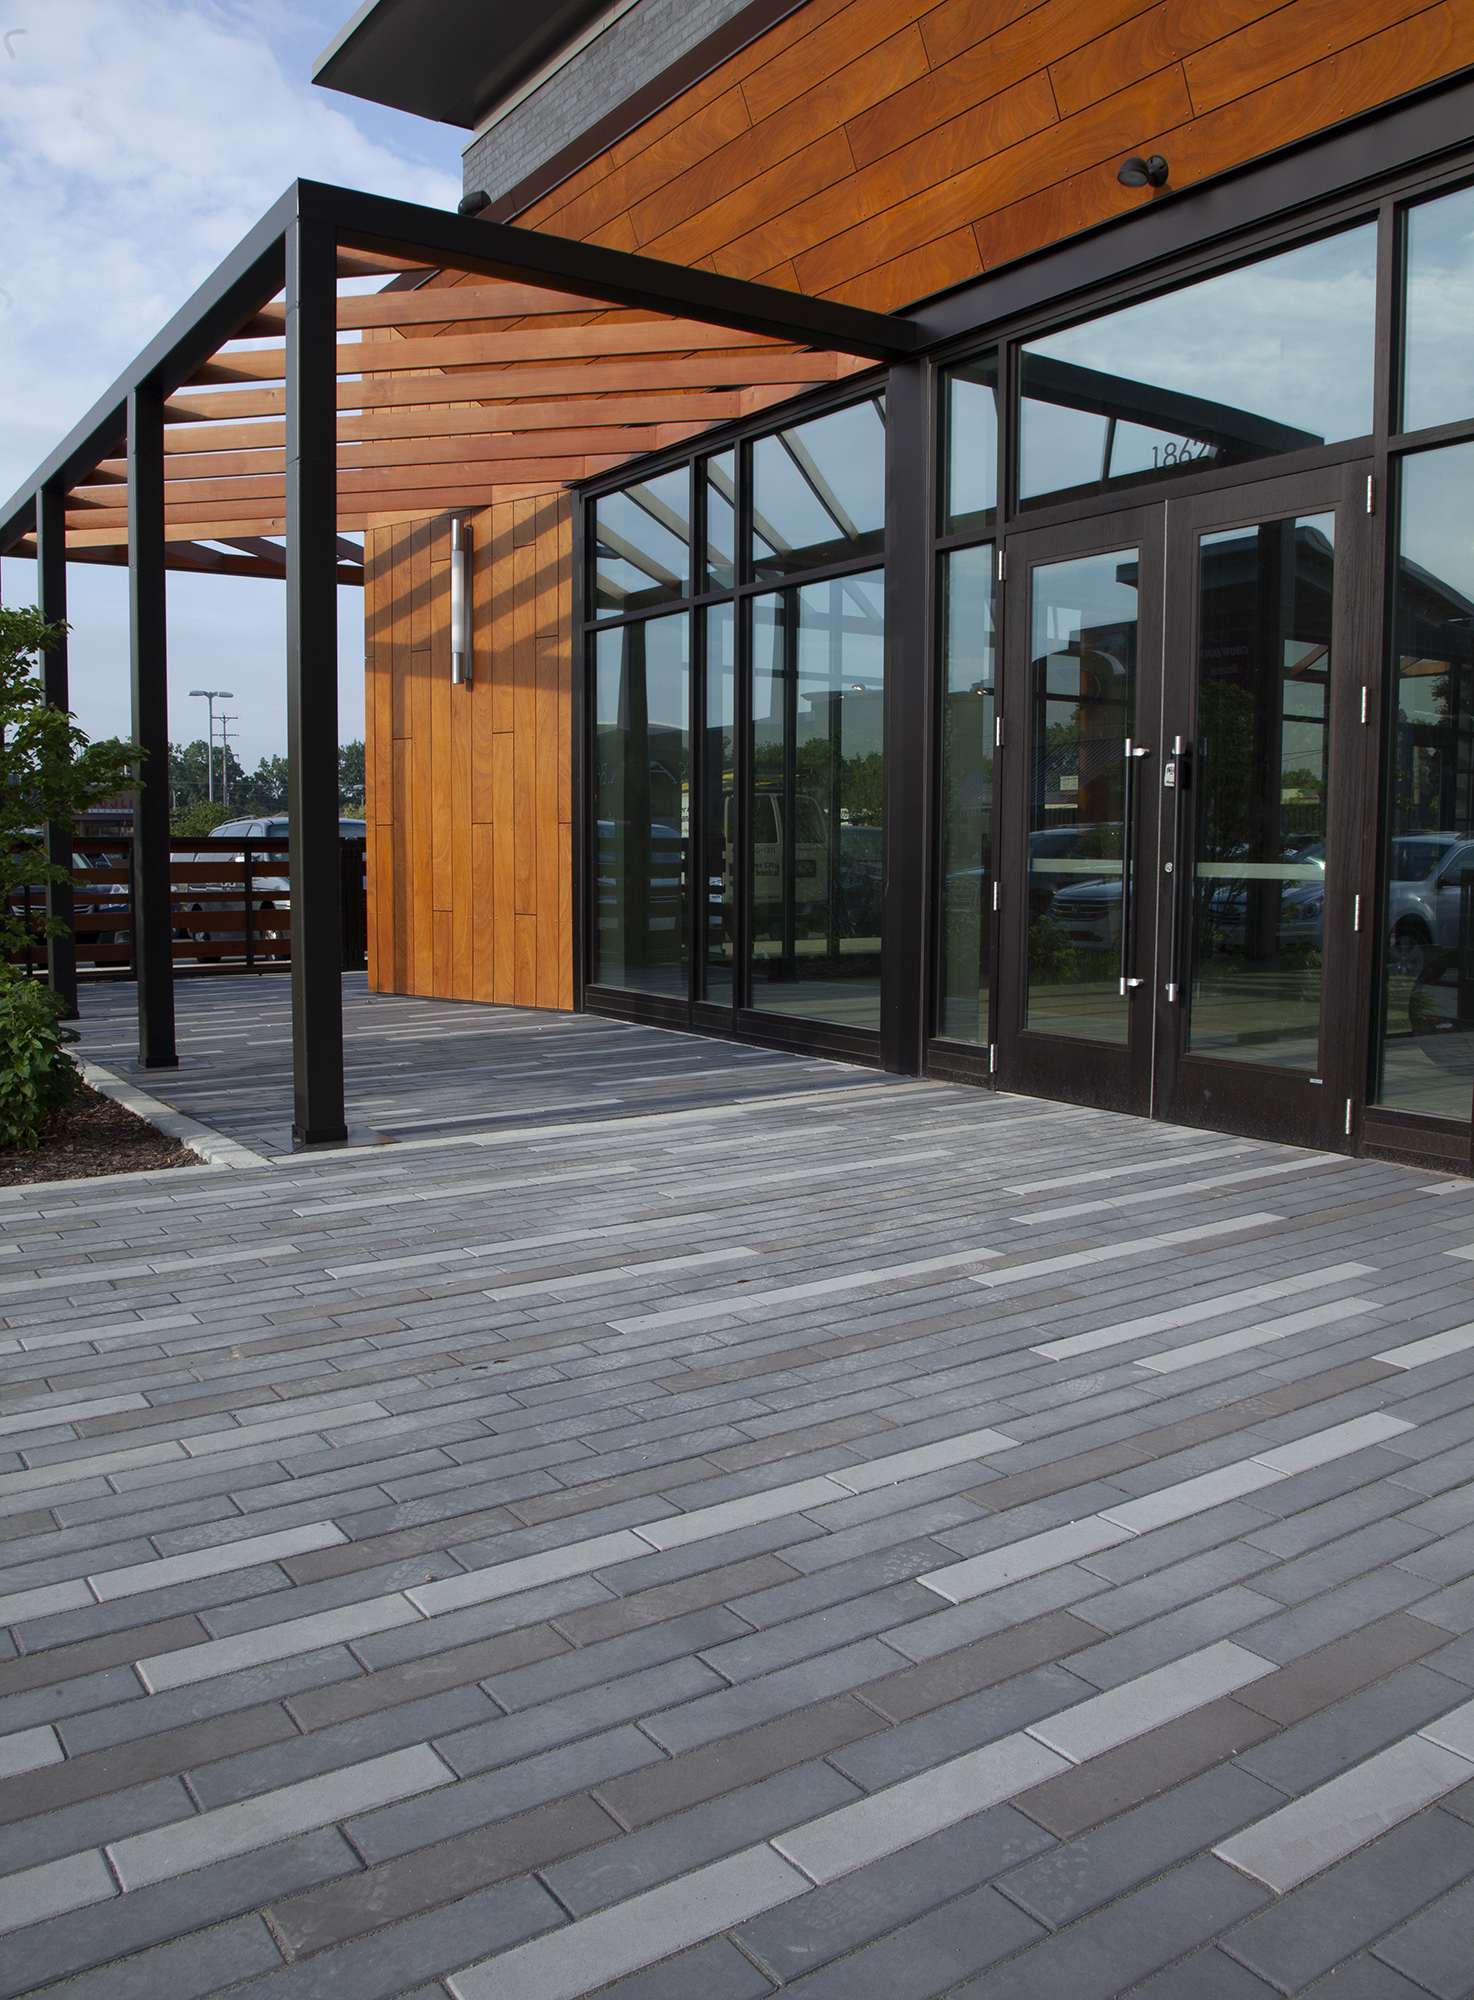 The entry to a wood panel and glass building with a modern pergola is paved with Promenade Plank Pavers in three colors in linear patterns.